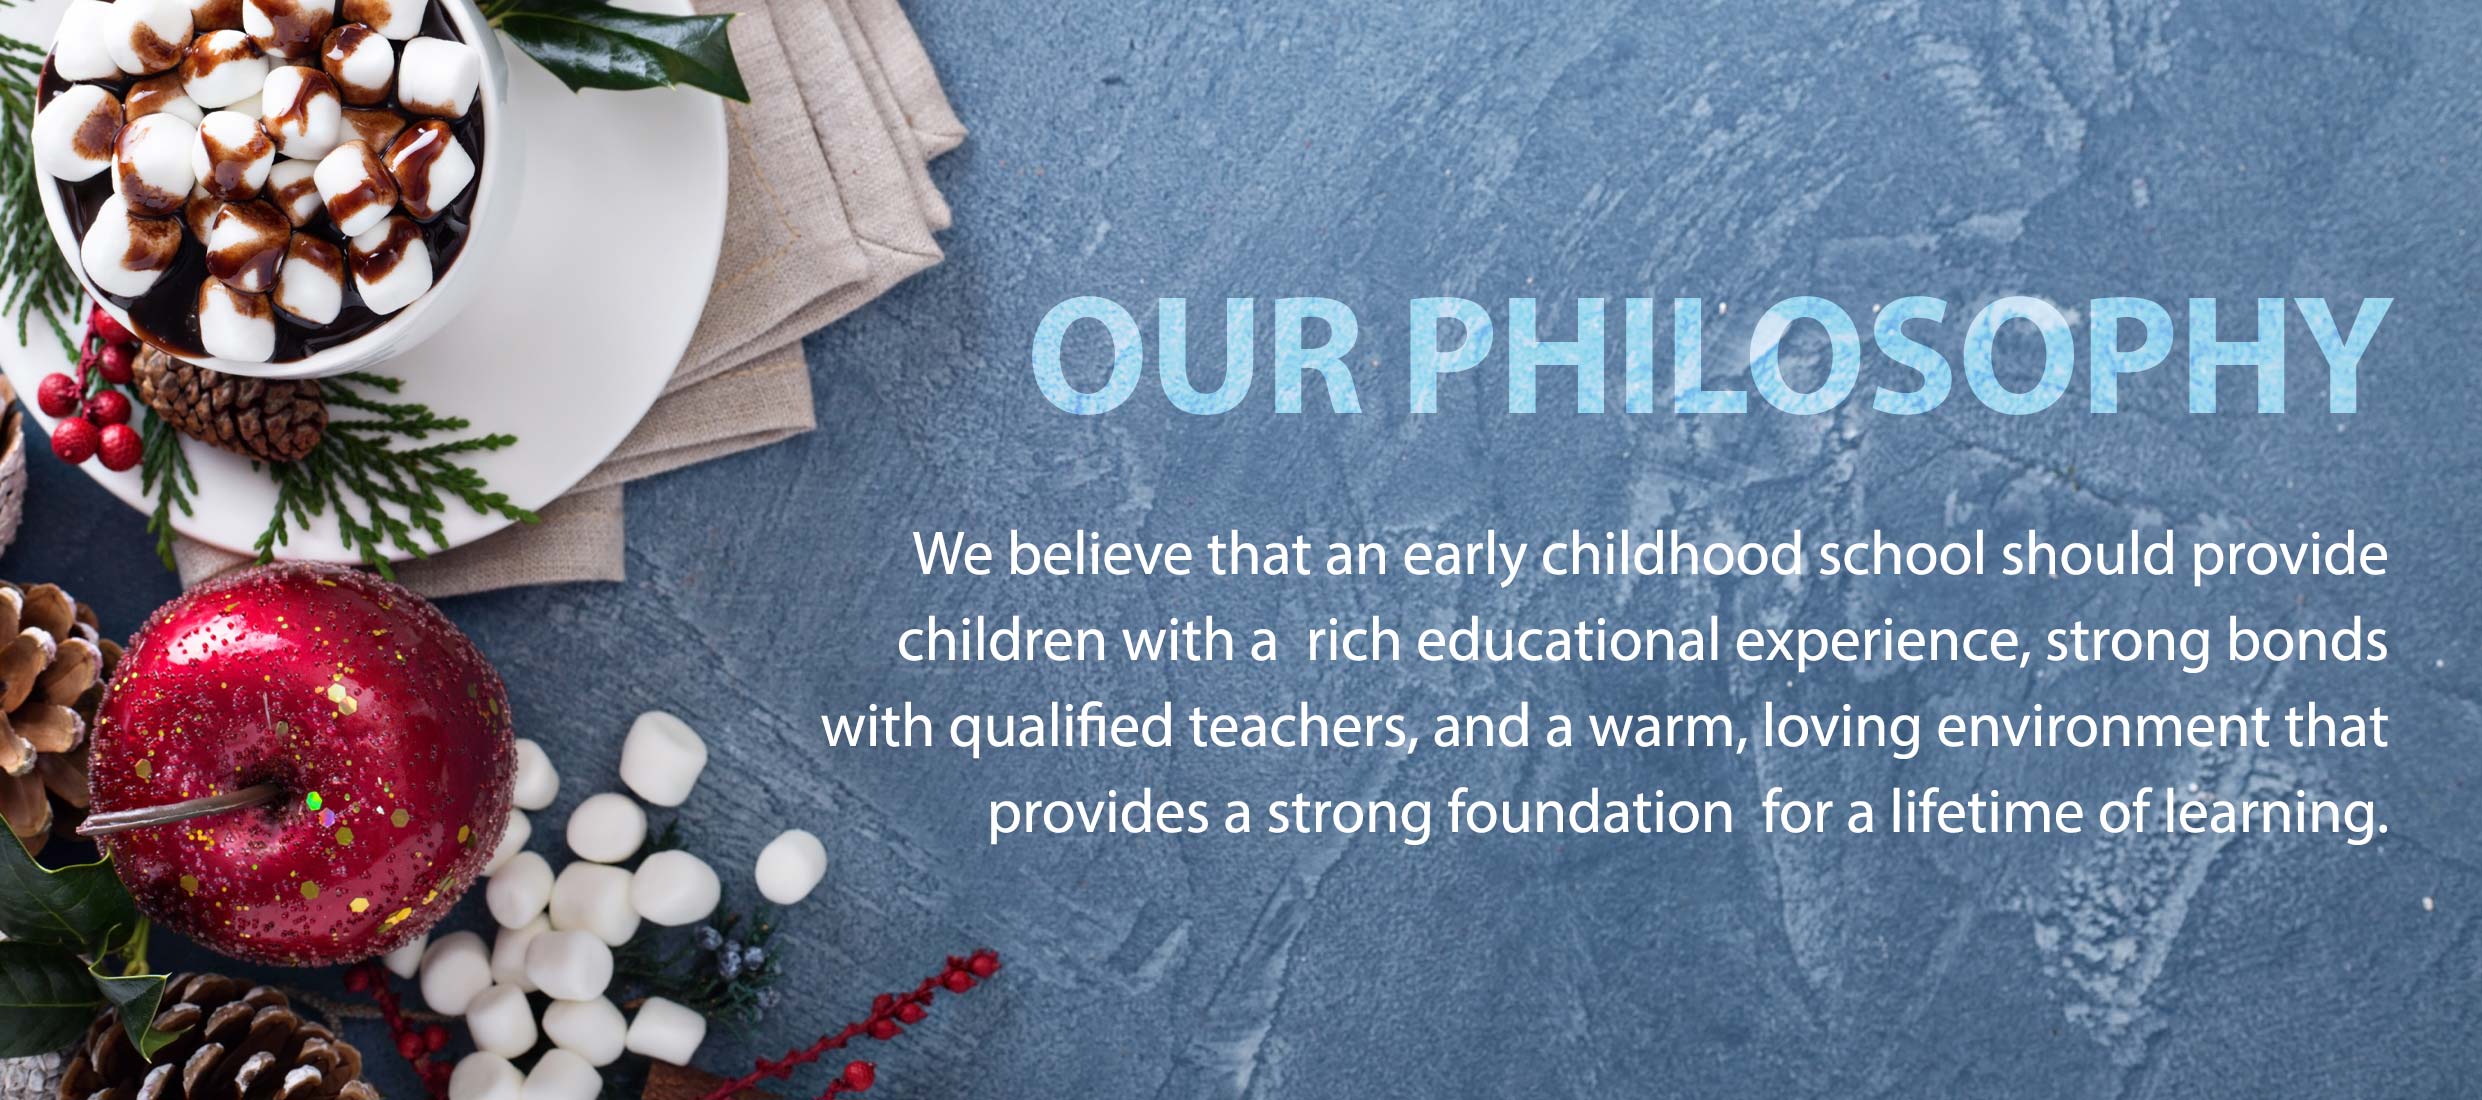 OUR PHILOSOPHY : We believe that an early childhood school should provide children with a rich educational experience, strong bonds with qualified teachers, and a warm, loving environment that provides a strong foundation for a lifetime of learning.